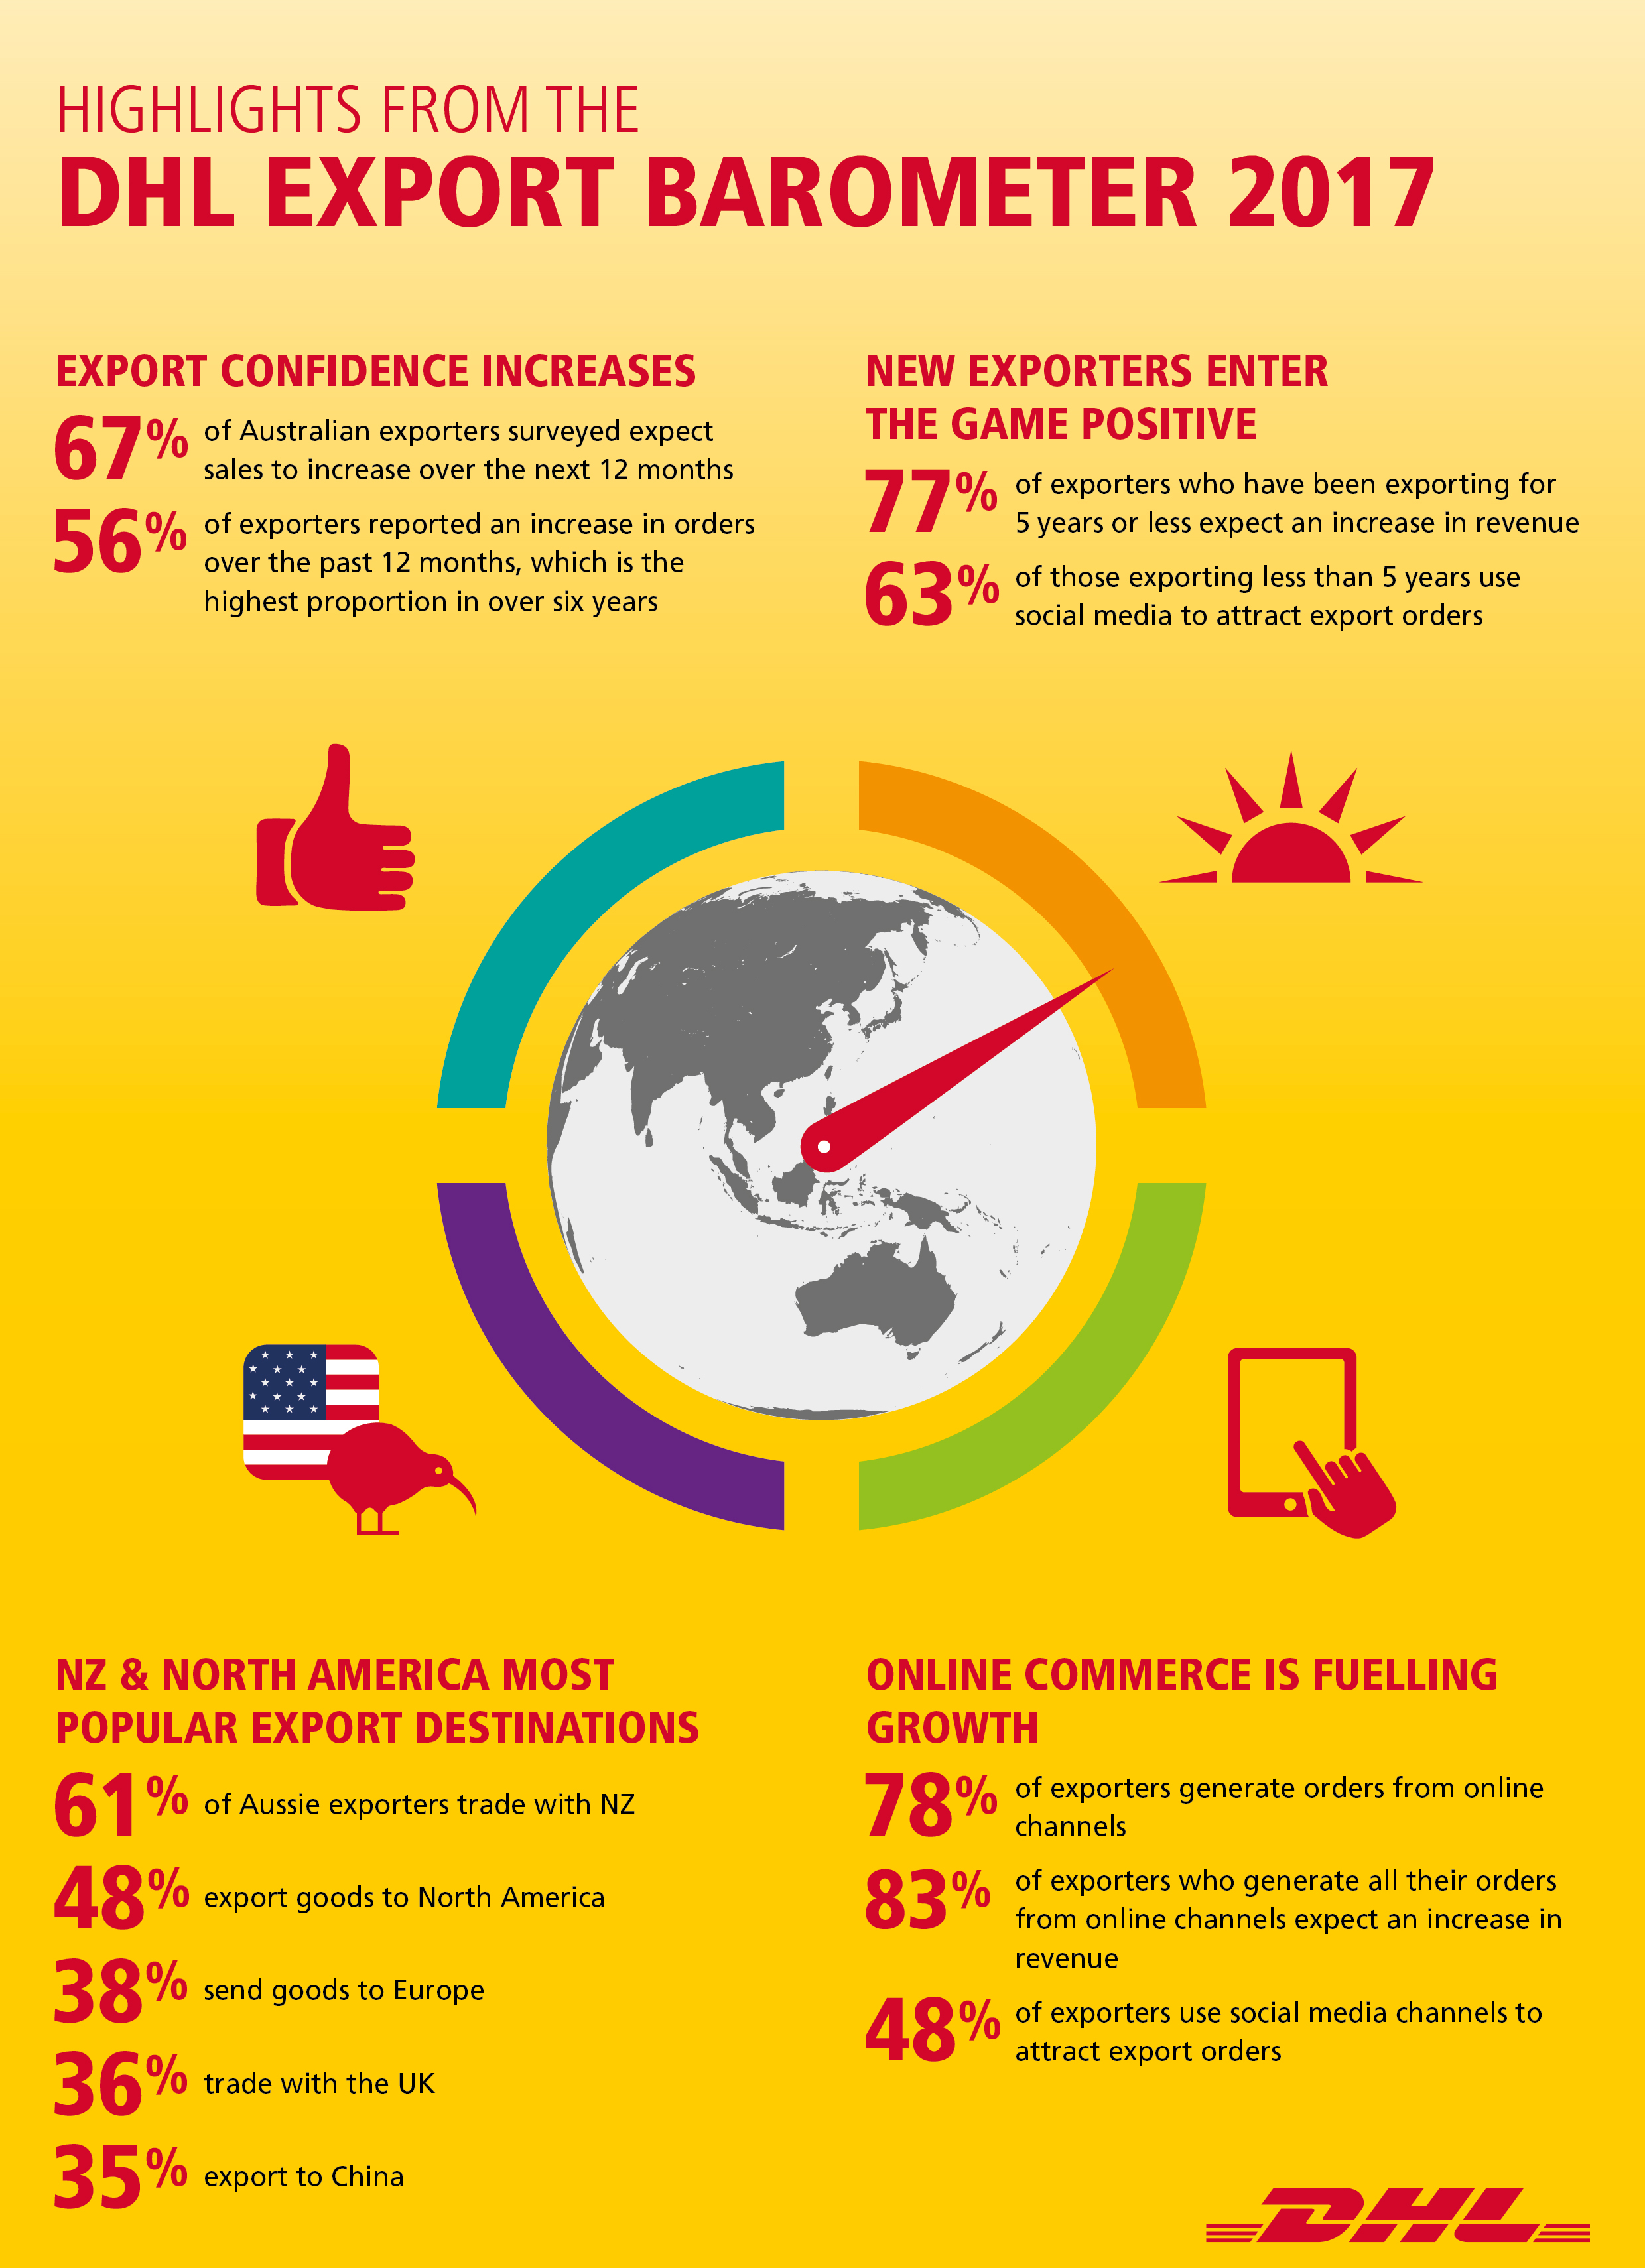 DHL Export Barometer 2017_Infographic With Highlights